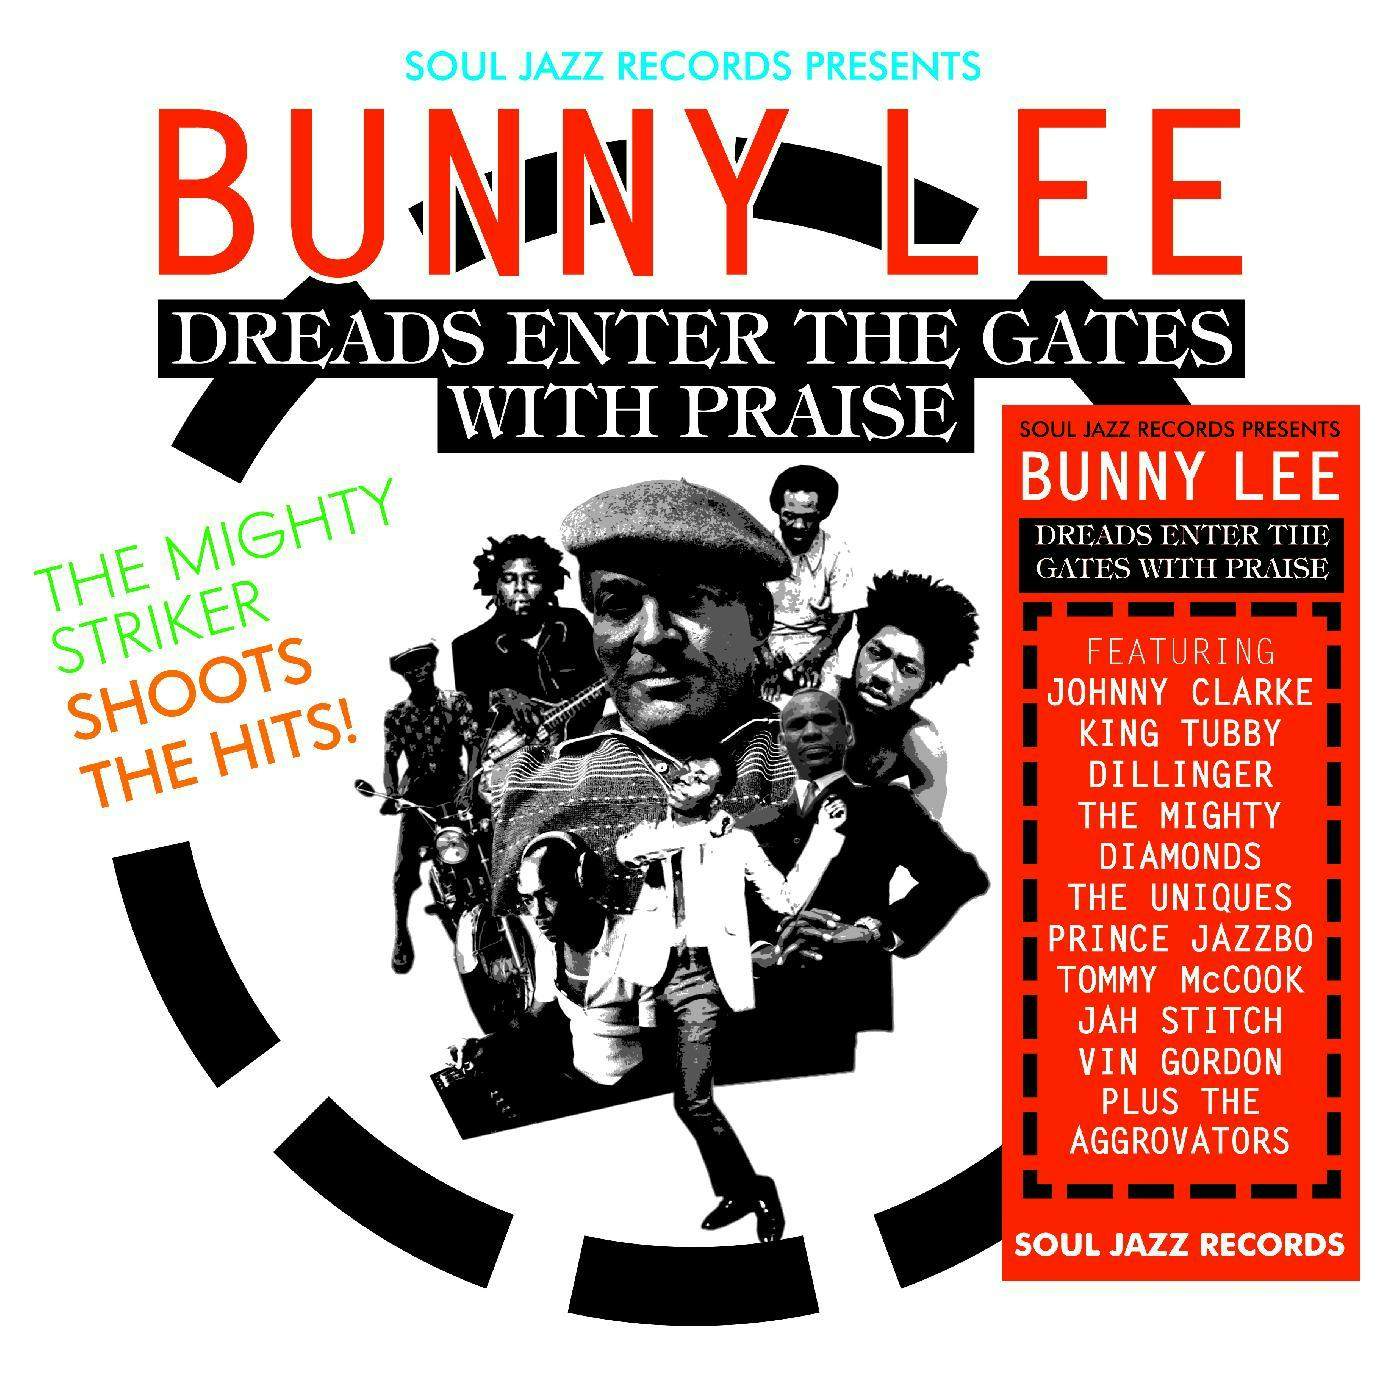 Bunny Lee & Friends Bunny Lee: Dreads Enter The Gates With Praise/The Mighty Striker Shoots The Hits! CD